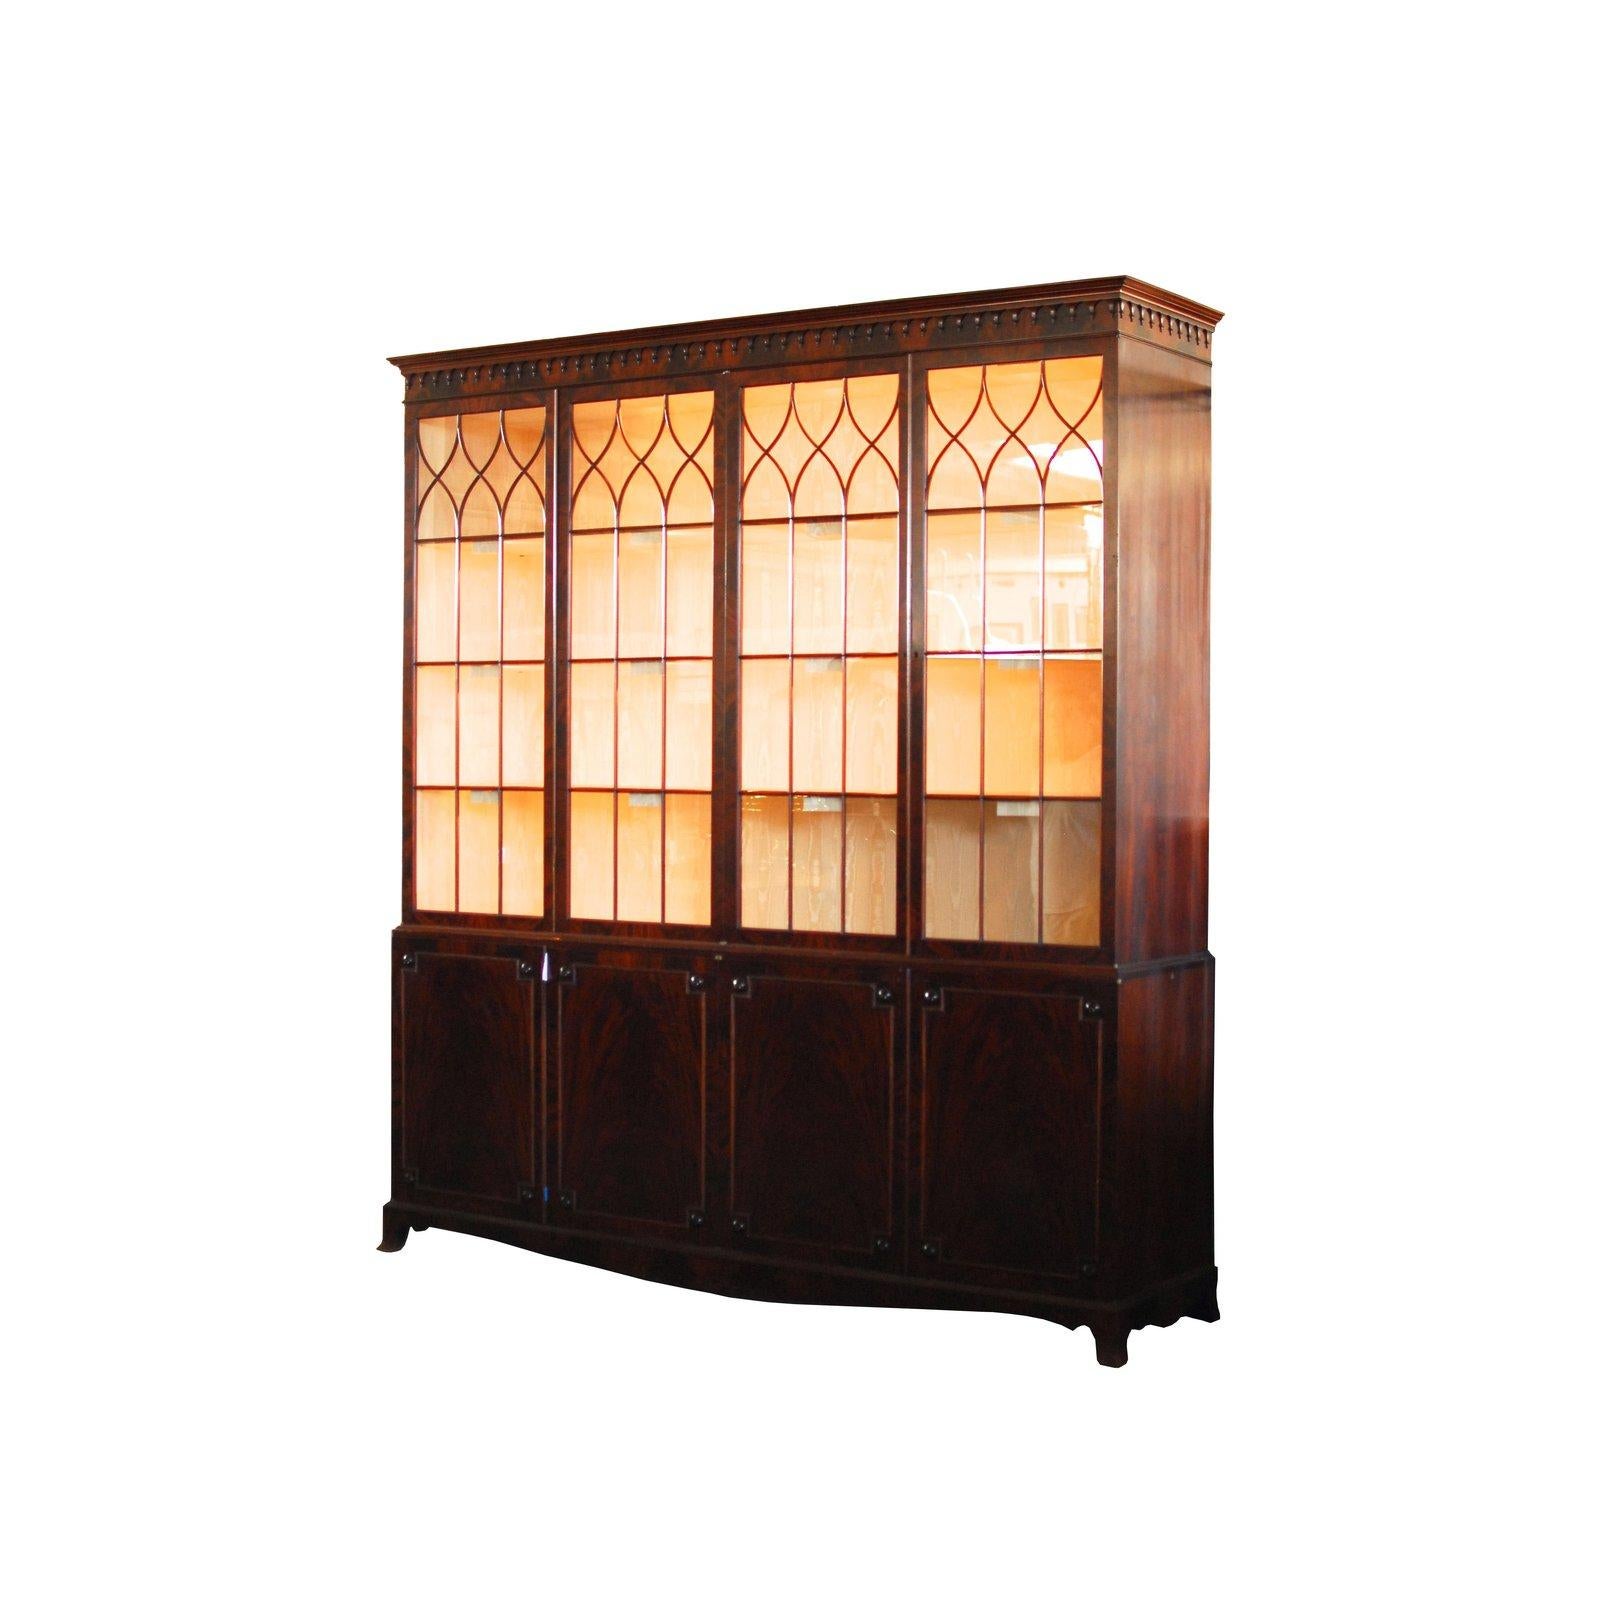 Monumental George III mahogany breakfront library cabinet. Massive Gothic Revival style with a four shelf top case that has a modern lighting system with sixteen lights and heavy duty circuits and breaker switches. Fully lined in a silk fabric and